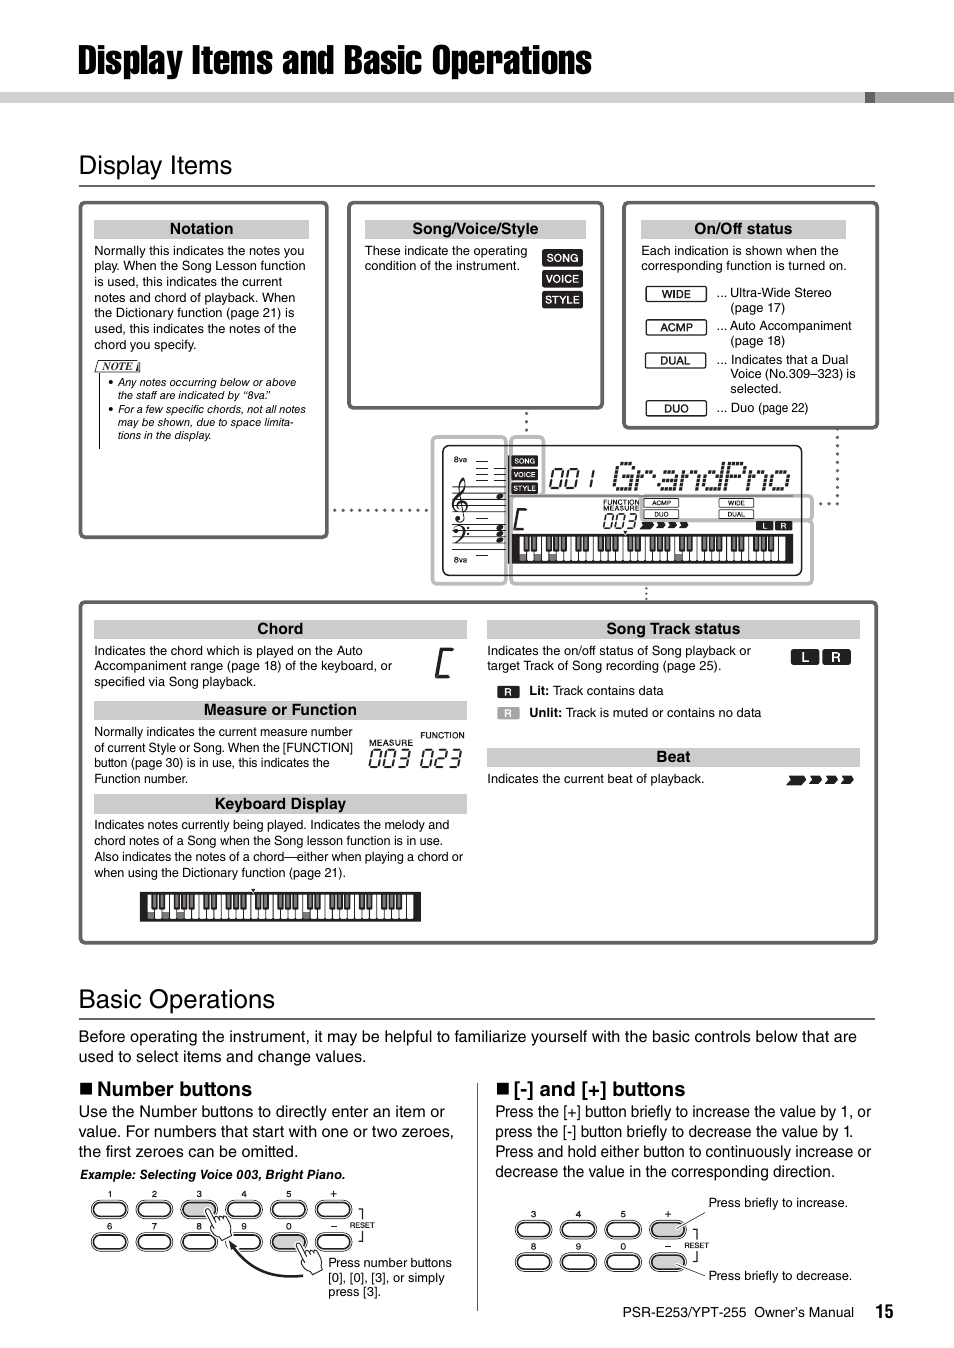 Display items and basic operations, Display items, Basic operations | Display items basic operations, Grandpno, Number buttons, And [+] buttons | Yamaha PSR-E253 User Manual | Page 15 / 48